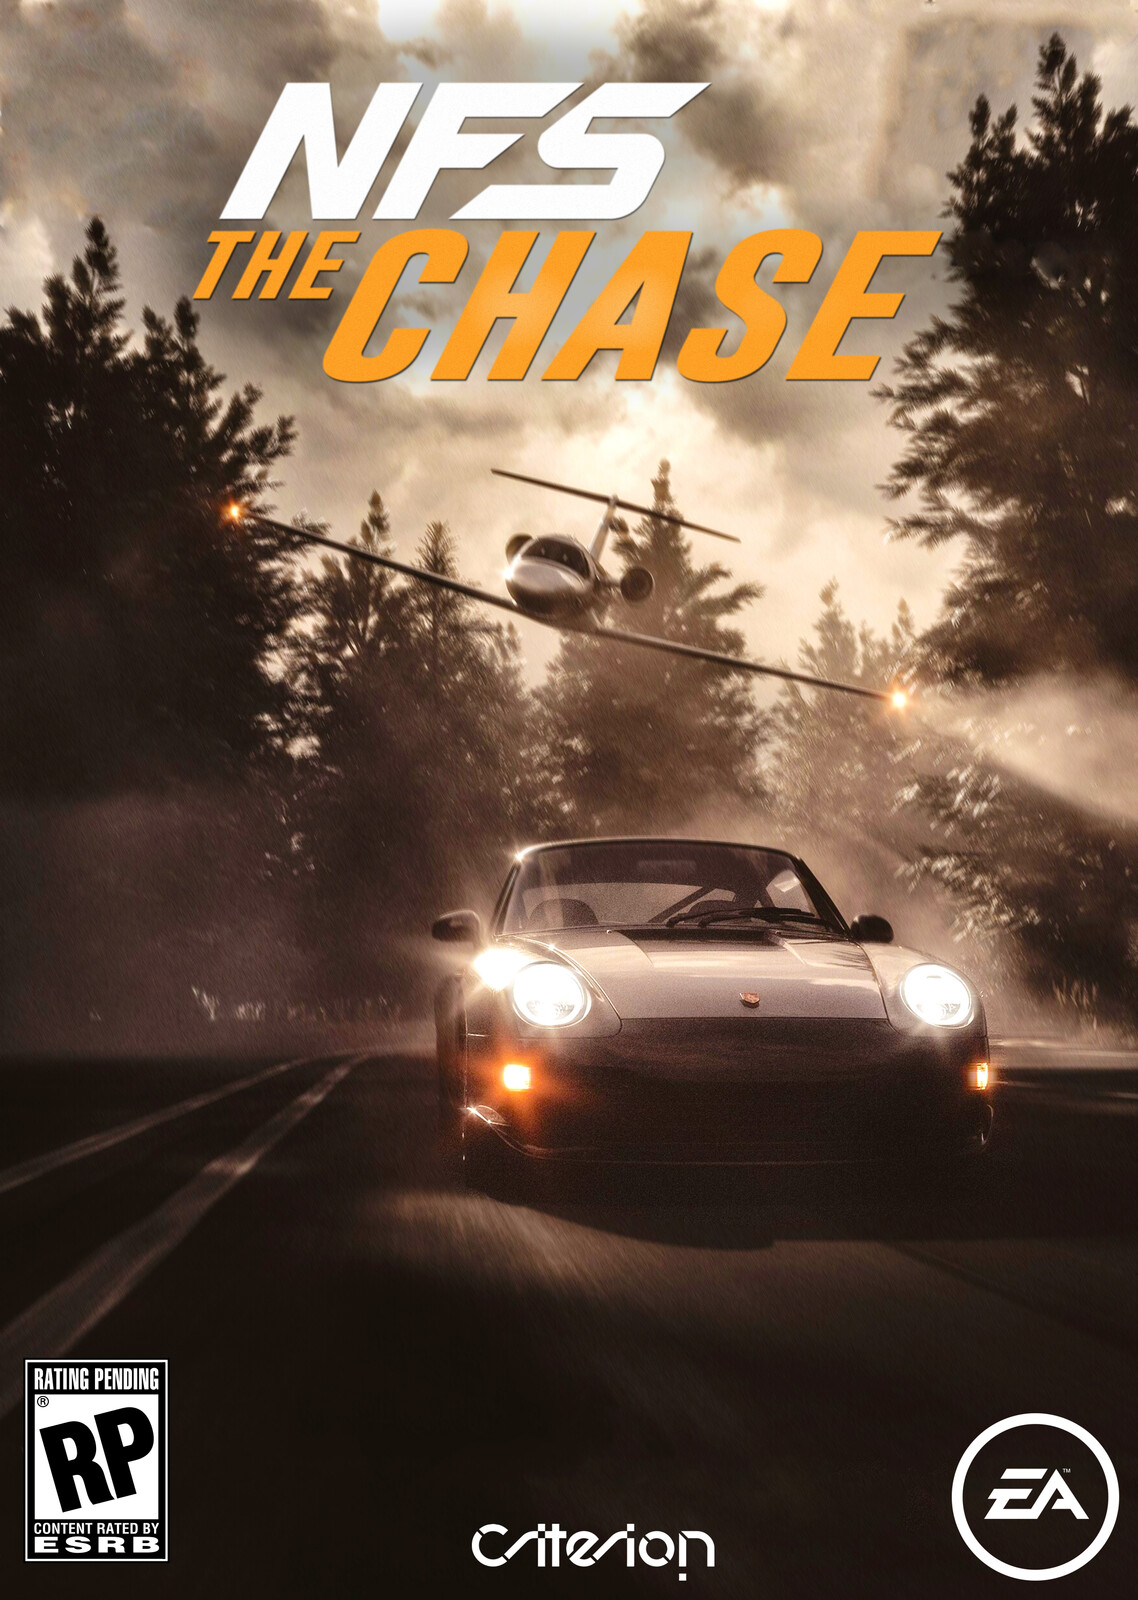 NFS The Chase (Original Idea)